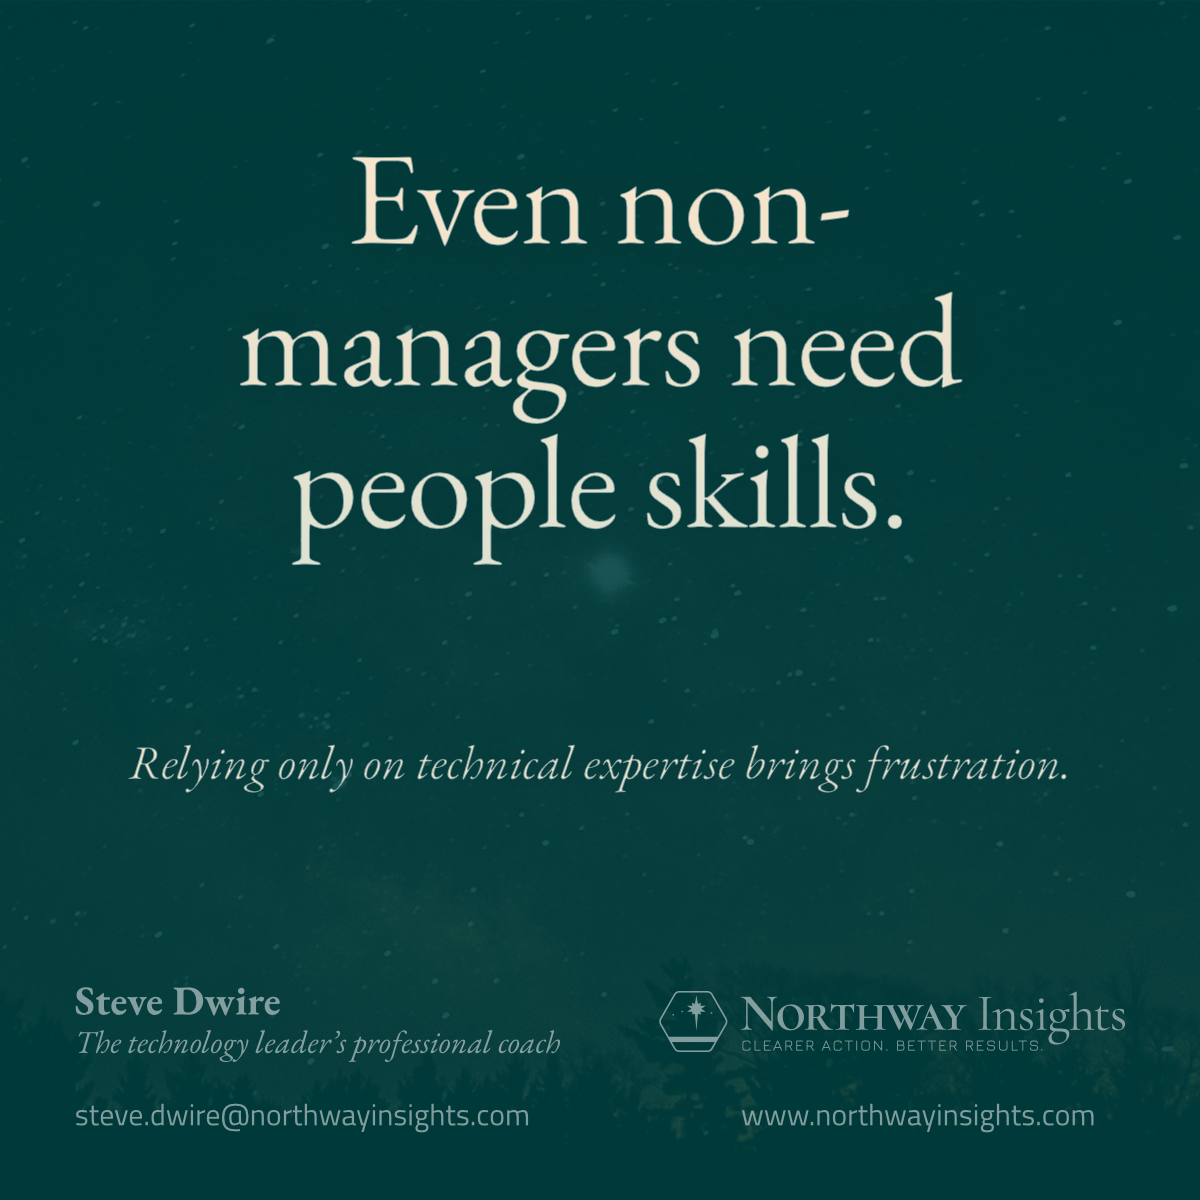 Even non-managers need people skills.